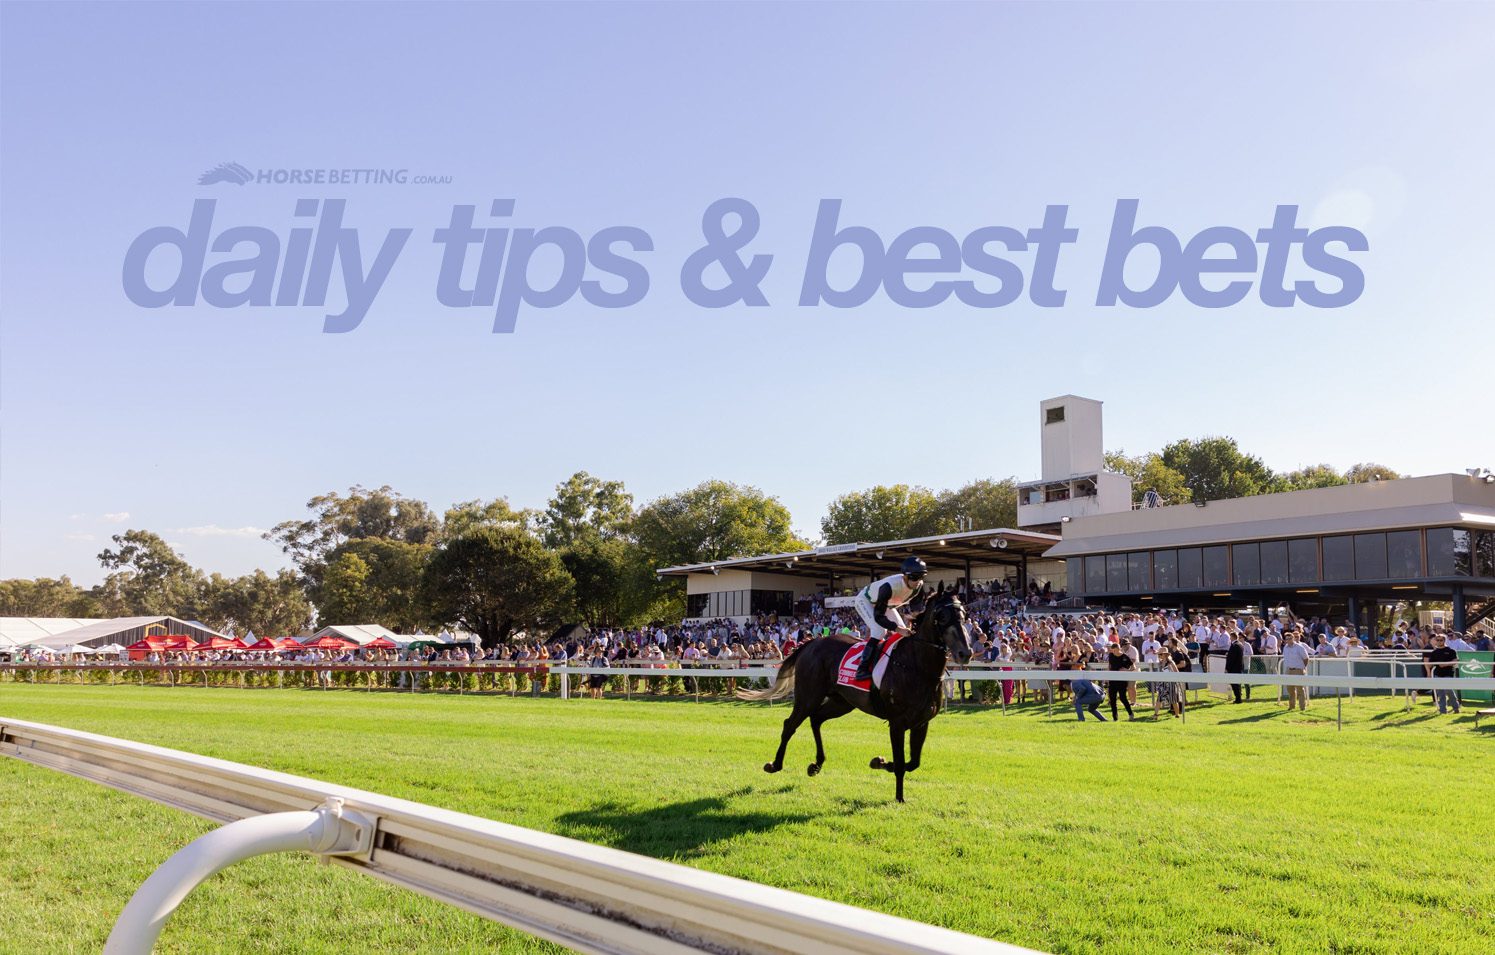 Friday horse racing tips & best bets 